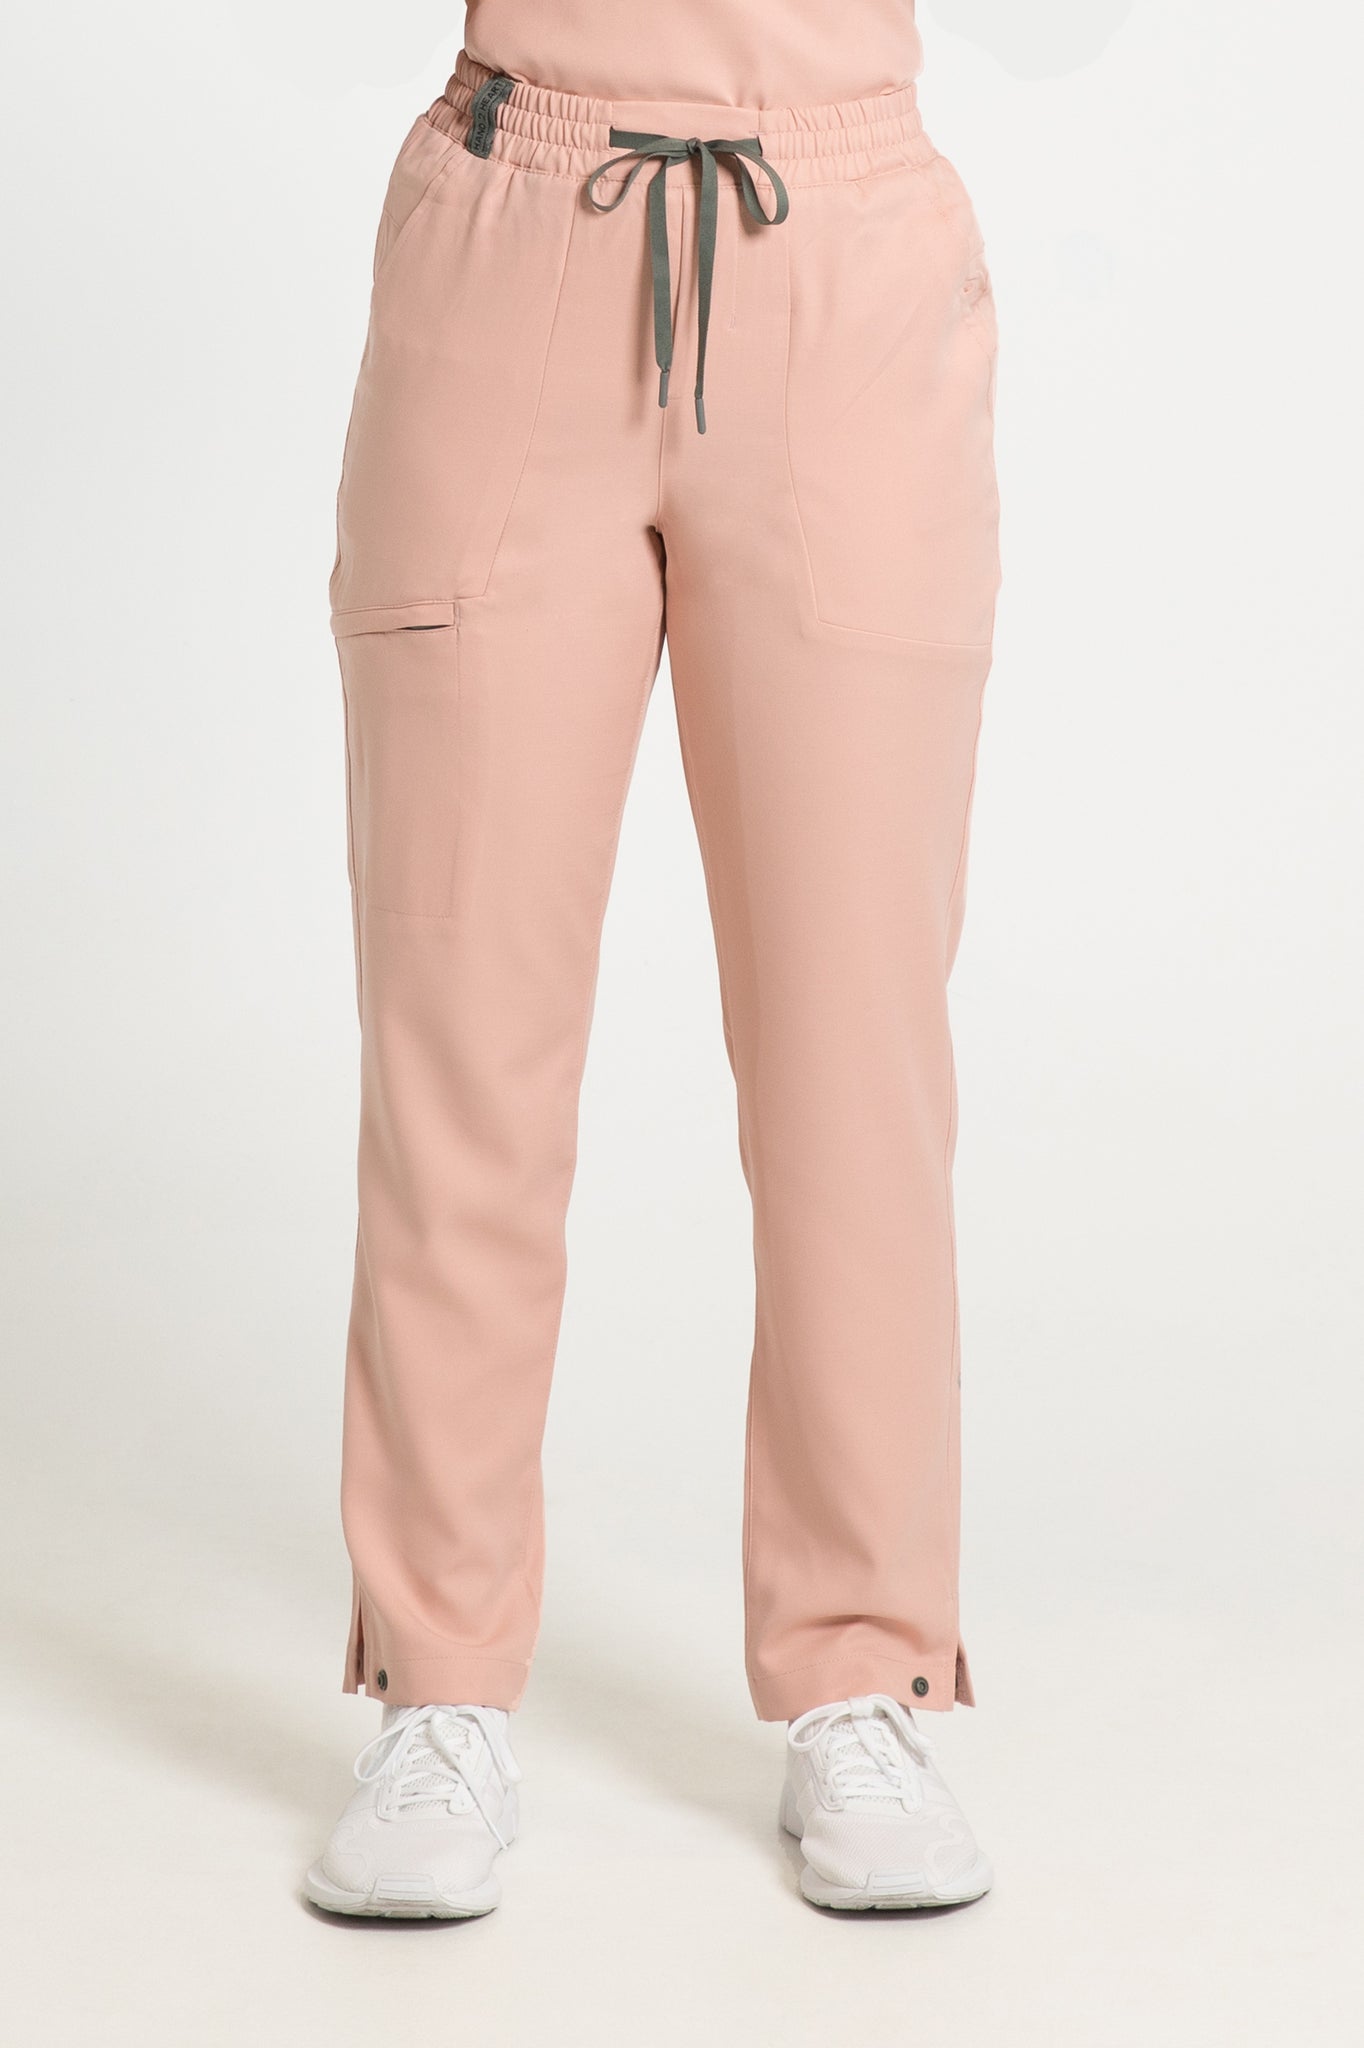 The Cumulus Cargo Scrub Pants - Coral Pink – Sustainable Scrubs